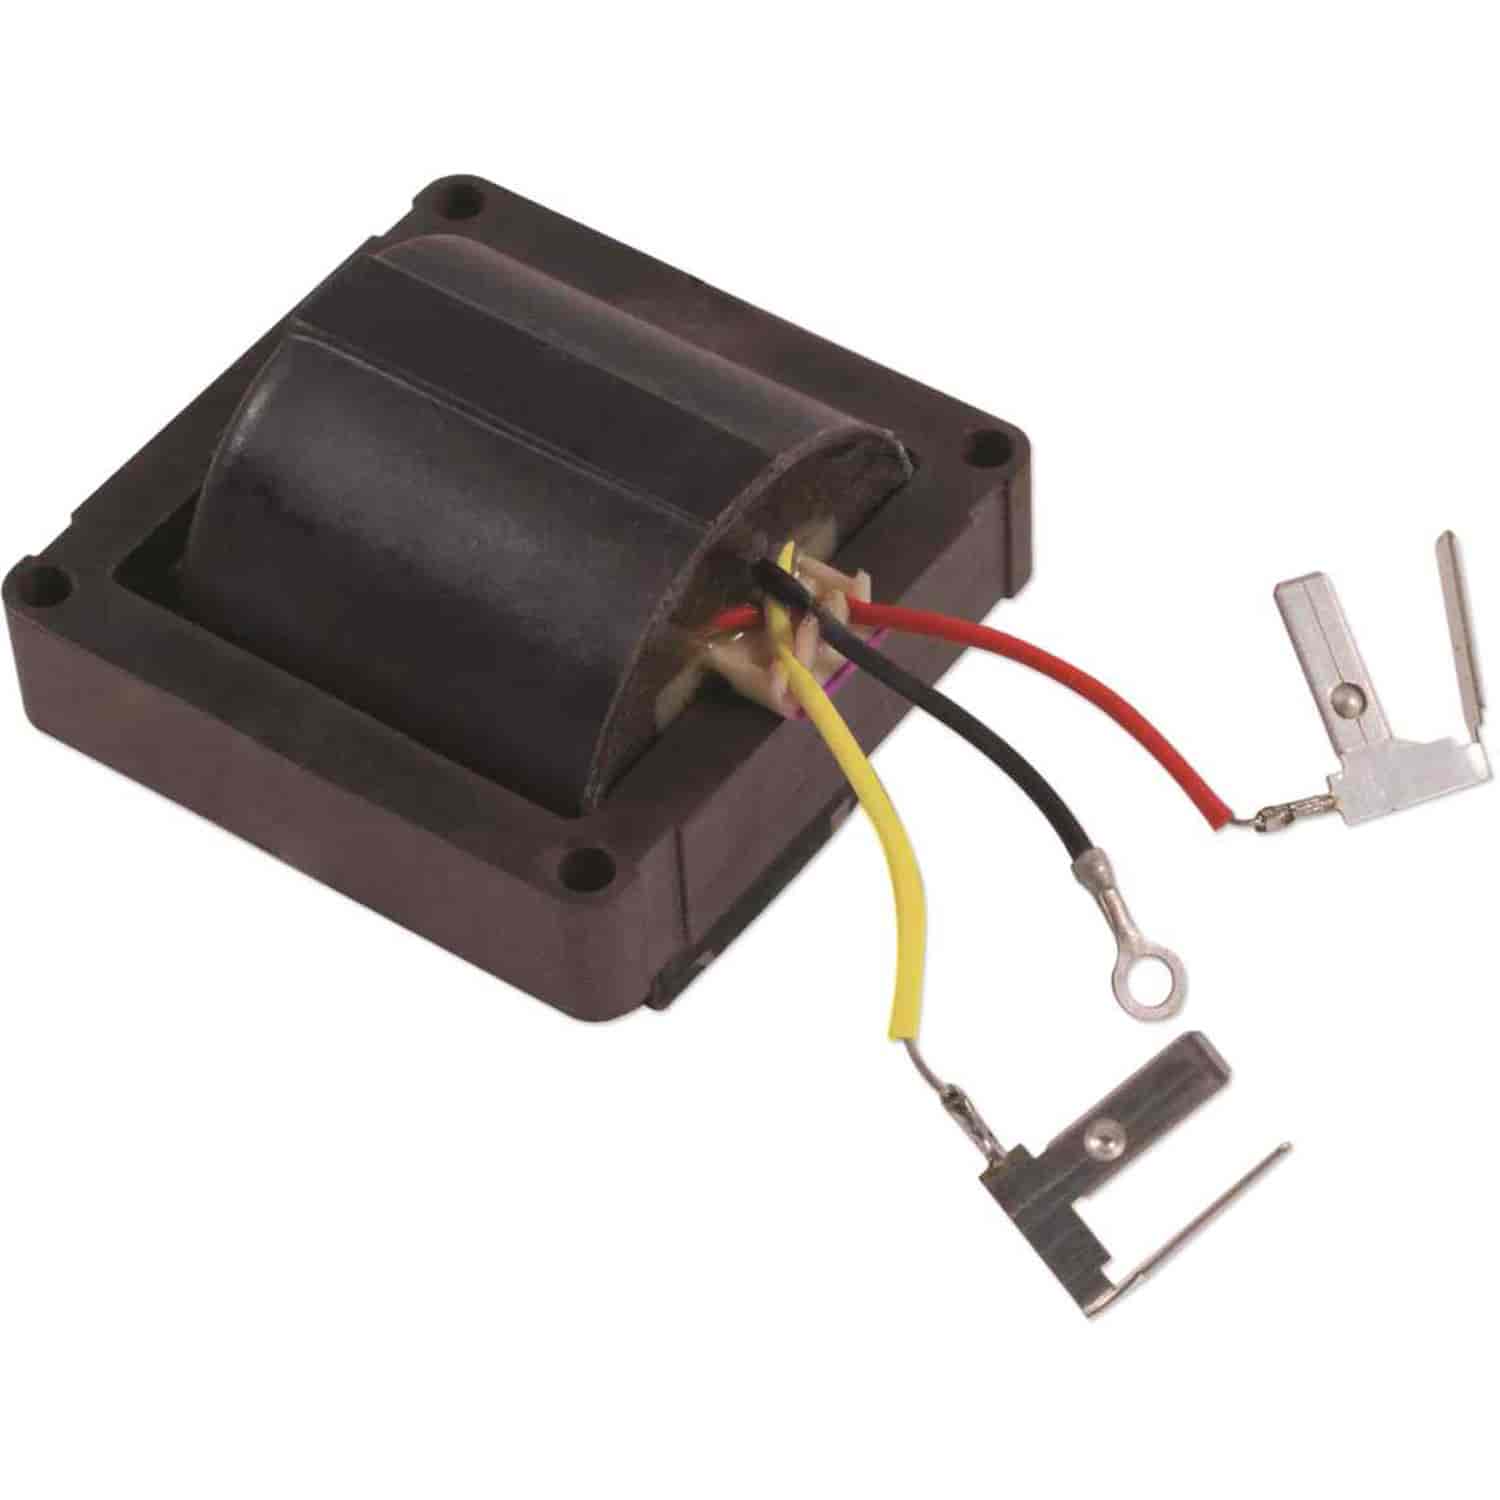 PS91 HEI EXTERNAL-CORE COIL FOR GM HEI RED/YELLOW WIRE